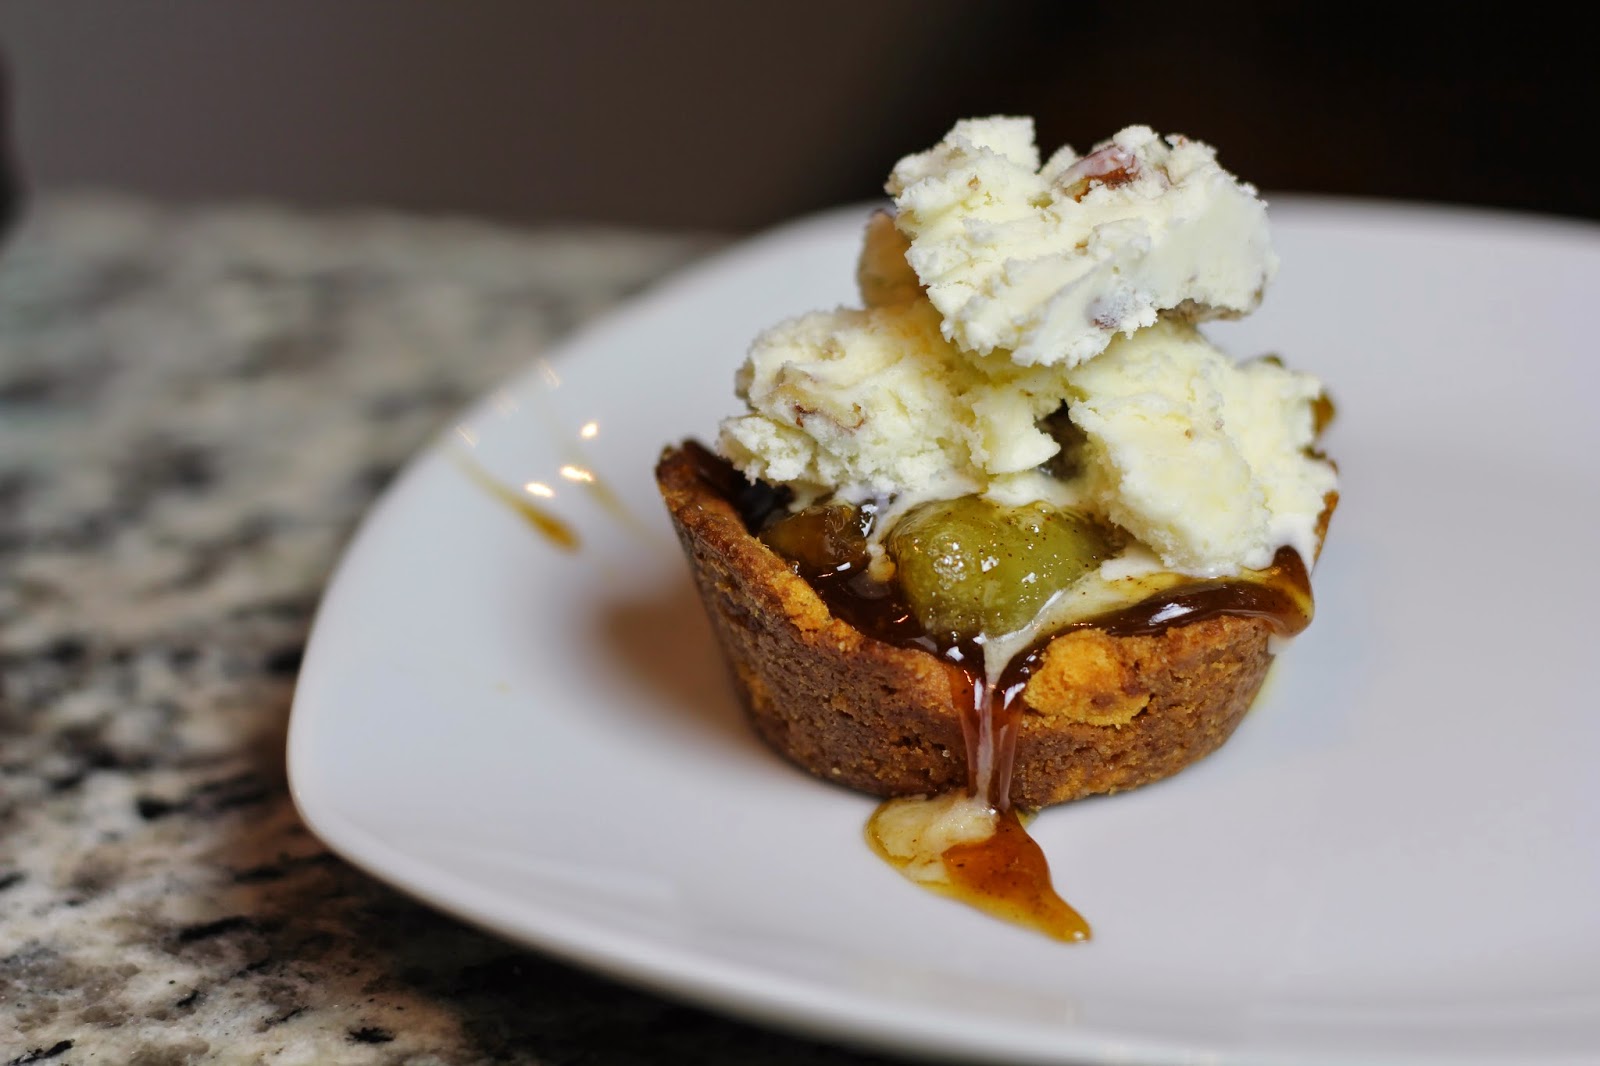 Guest Blog Post: Fried Apple with Nilla Wafer Tart